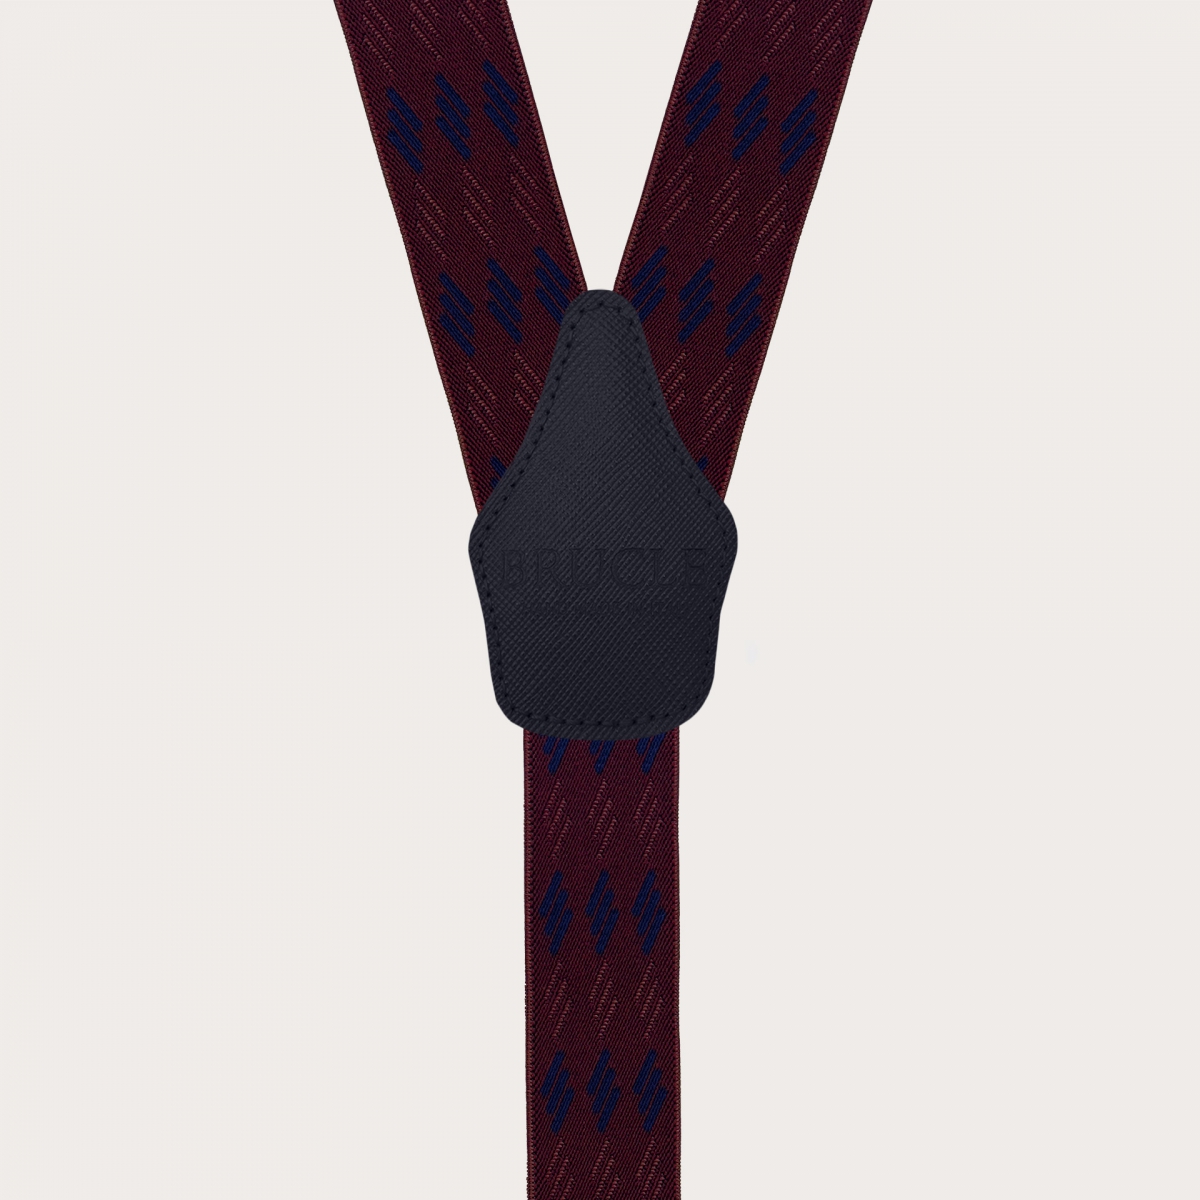 Wide unisex suspenders with burgundy and blue striped pattern